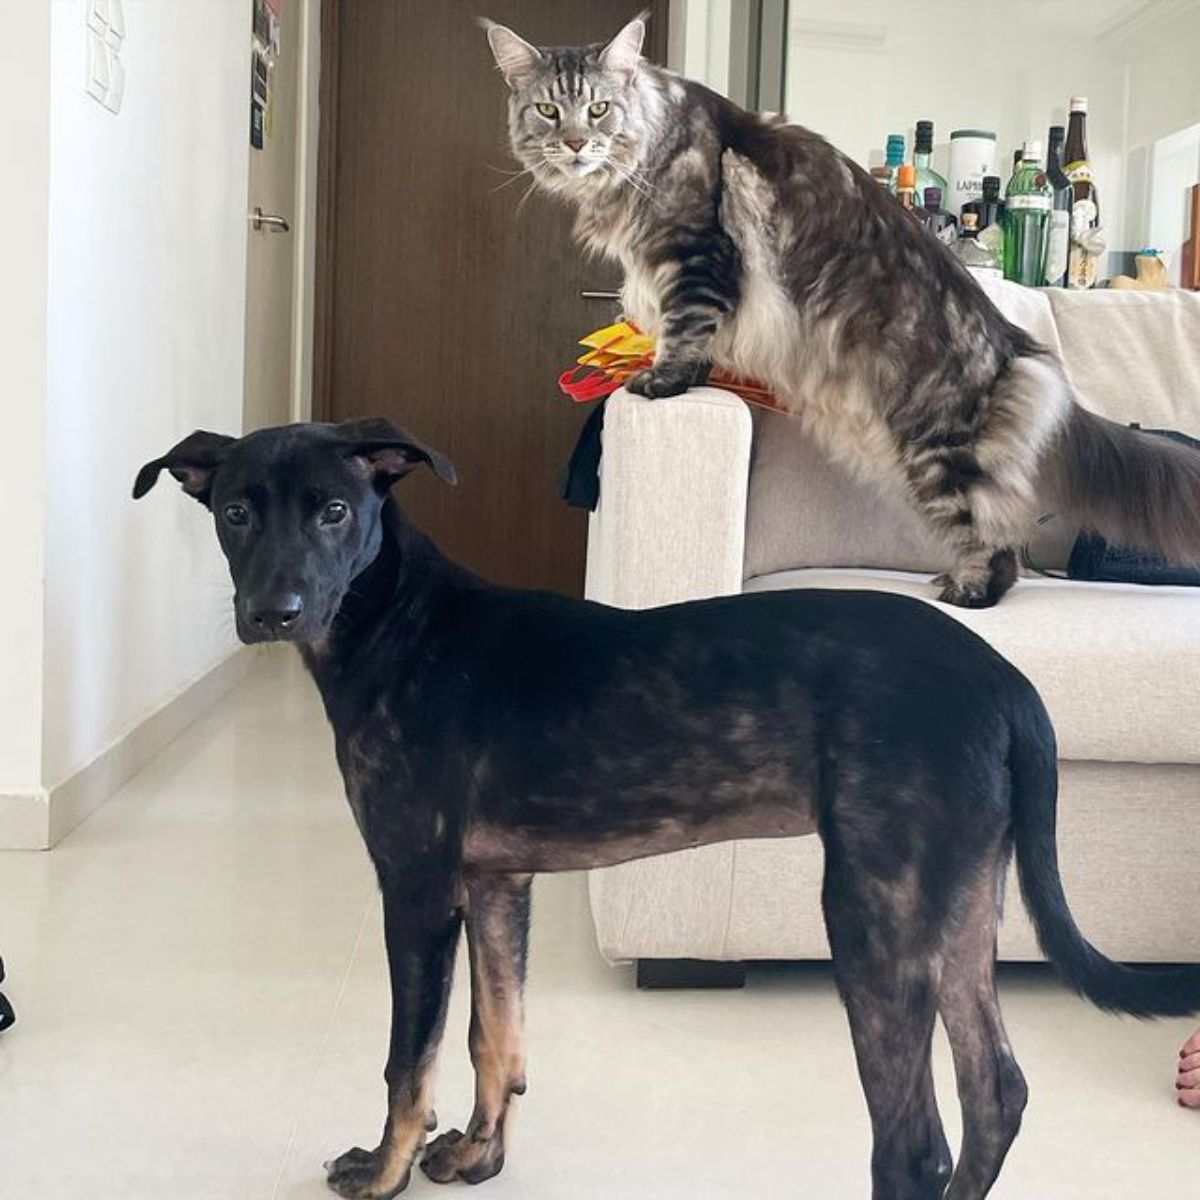 A silver maine coon standing on a couch next to a black dog.